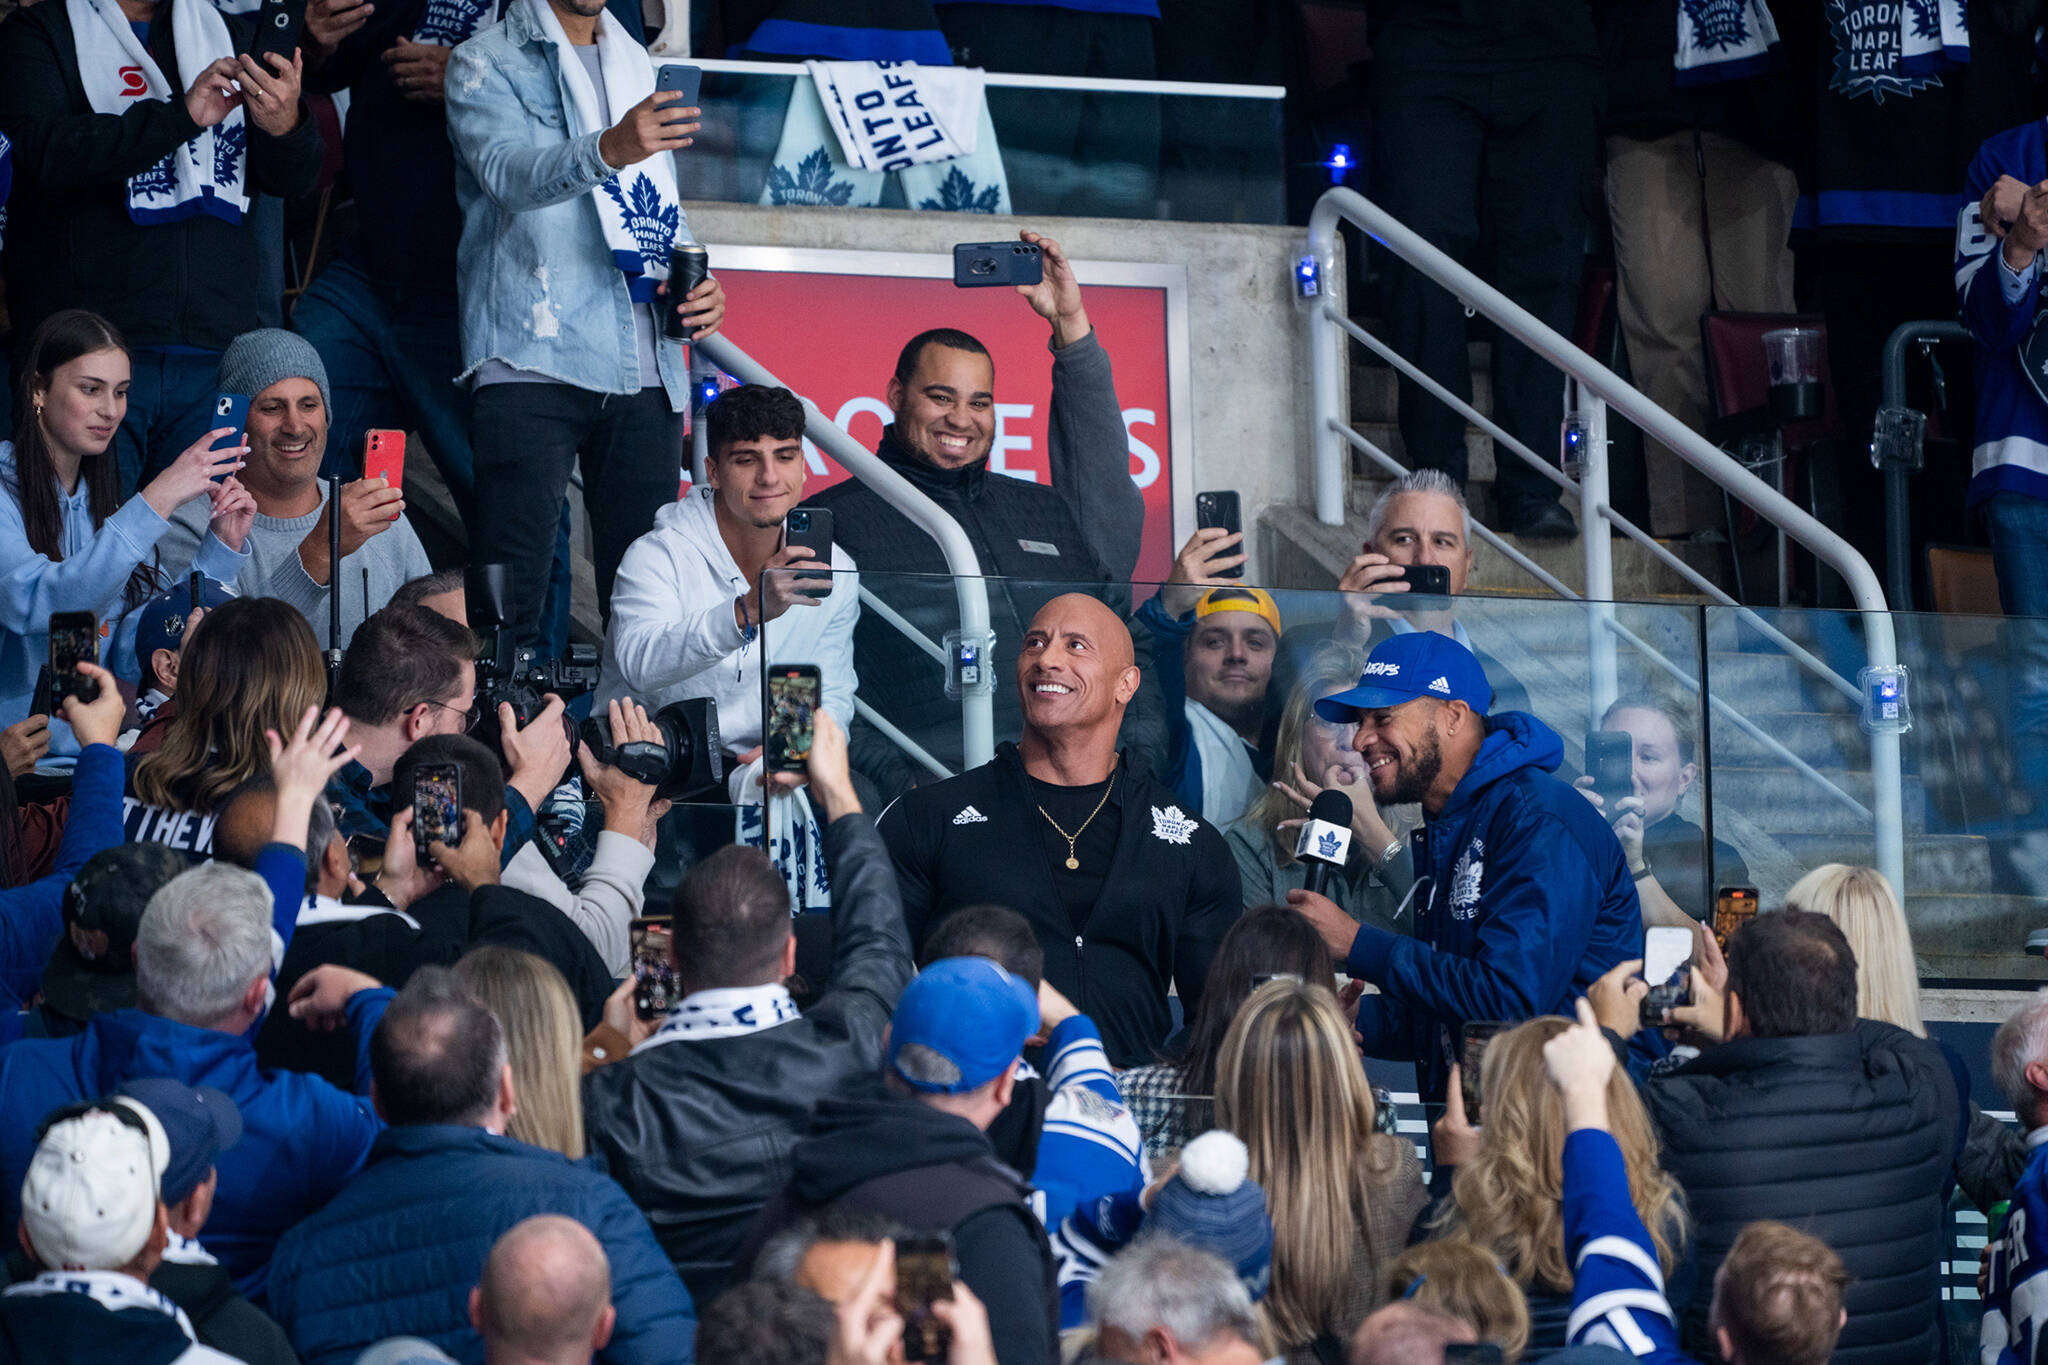 the rock at leafs game